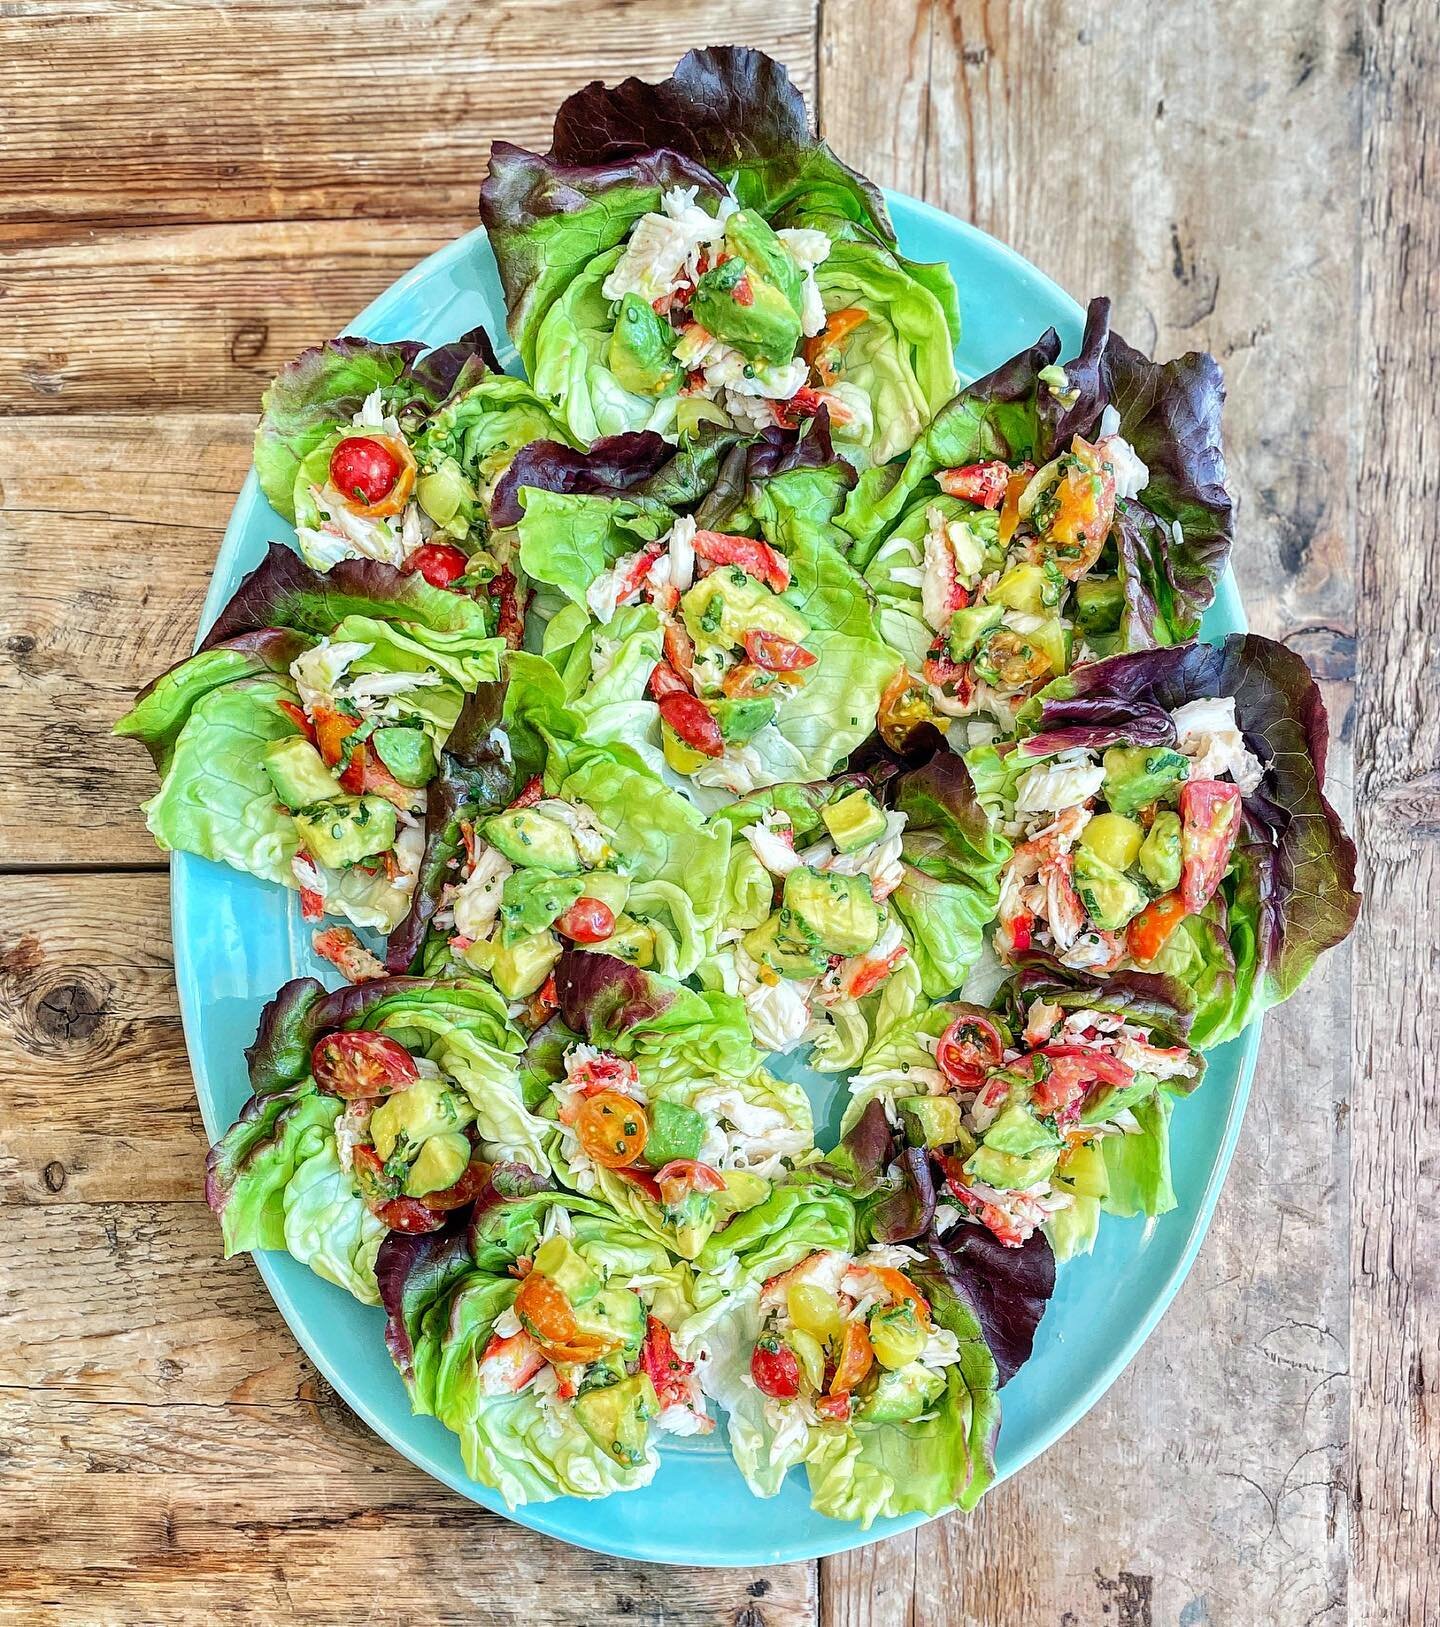 King crab lettuce wraps with an avocado and heirloom tomato relish